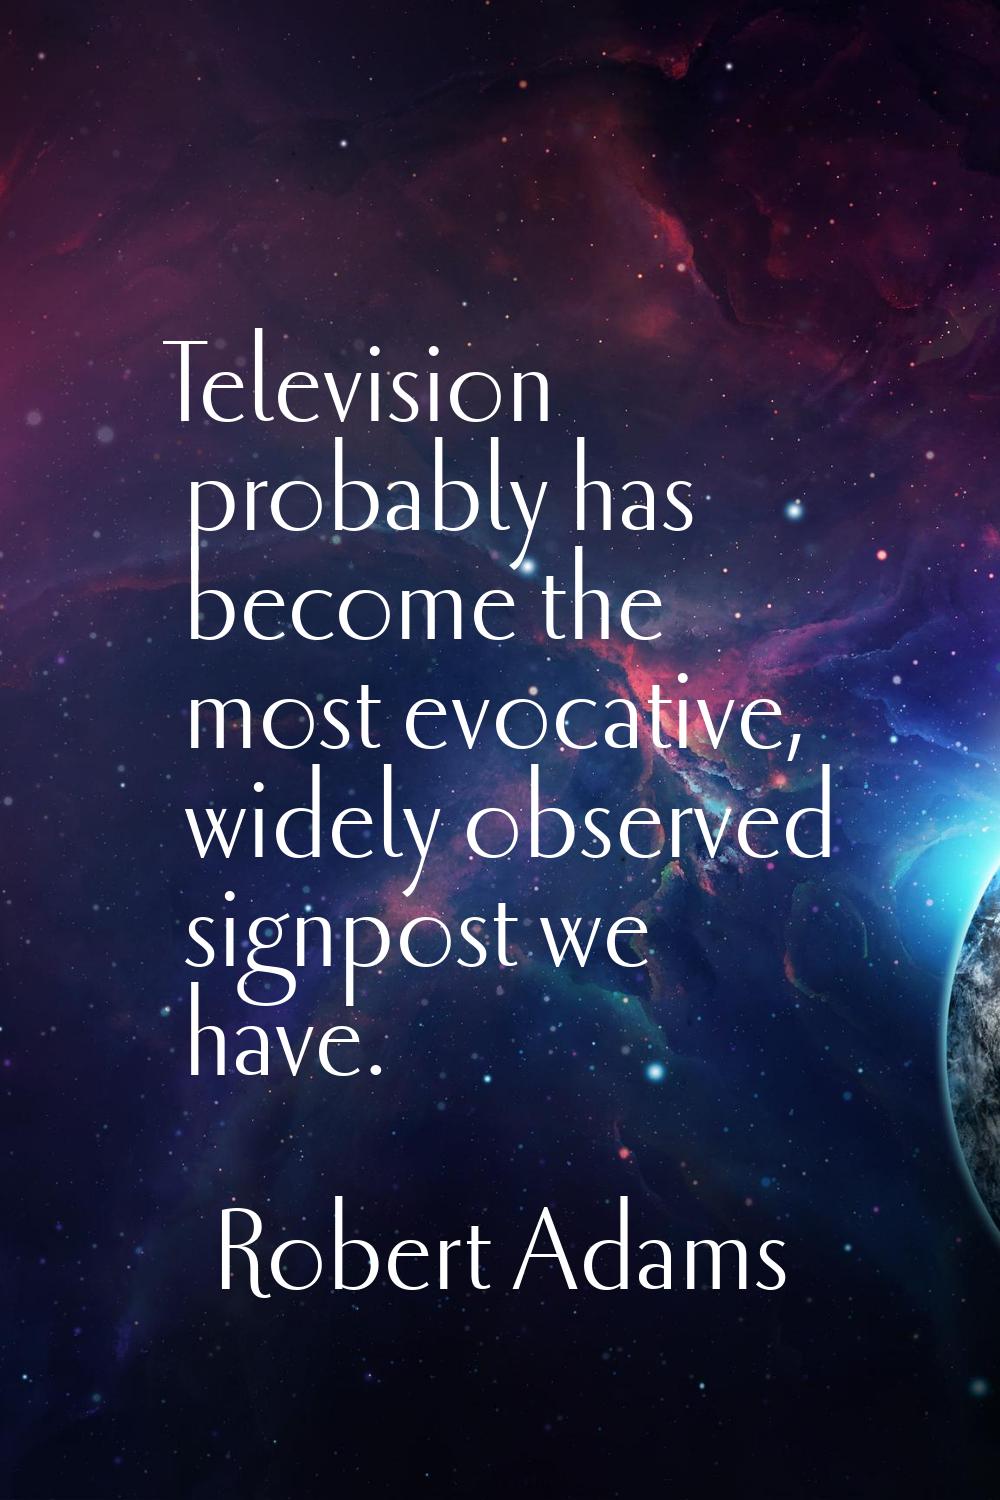 Television probably has become the most evocative, widely observed signpost we have.